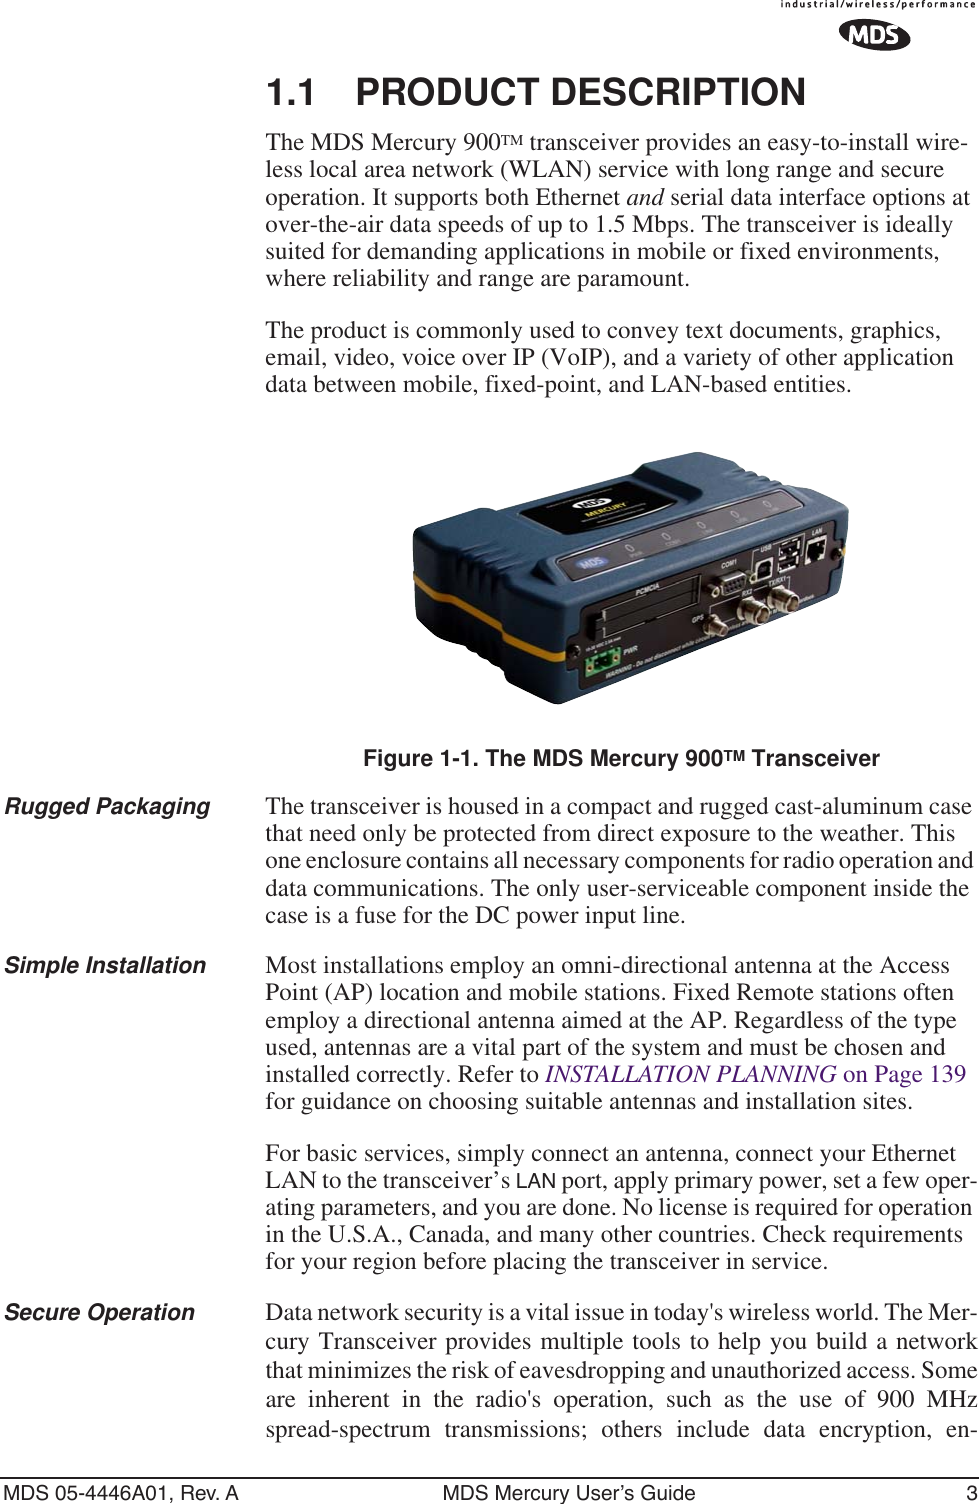  MDS 05-4446A01, Rev. A MDS Mercury User’s Guide 3 1.1 PRODUCT DESCRIPTION The MDS Mercury 900 TM  transceiver provides an easy-to-install wire-less local area network (WLAN) service with long range and secure operation. It supports both Ethernet  and  serial data interface options at over-the-air data speeds of up to 1.5 Mbps. The transceiver is ideally suited for demanding applications in mobile or fixed environments, where reliability and range are paramount.The product is commonly used to convey text documents, graphics, email, video, voice over IP (VoIP), and a variety of other application data between mobile, fixed-point, and LAN-based entities. Invisible place holder Figure 1-1. The MDS   Mercury 900 TM  Transceiver Rugged Packaging The transceiver is housed in a compact and rugged cast-aluminum case that need only be protected from direct exposure to the weather. This one enclosure contains all necessary components for radio operation and data communications. The only user-serviceable component inside the case is a fuse for the DC power input line. Simple Installation Most installations employ an omni-directional antenna at the Access Point (AP) location and mobile stations. Fixed Remote stations often employ a directional antenna aimed at the AP. Regardless of the type used, antennas are a vital part of the system and must be chosen and installed correctly. Refer to  INSTALLATION PLANNING  on Page 139 for guidance on choosing suitable antennas and installation sites.For basic services, simply connect an antenna, connect your Ethernet LAN to the transceiver’s  LAN  port, apply primary power, set a few oper-ating parameters, and you are done. No license is required for operation in the U.S.A., Canada, and many other countries. Check requirements for your region before placing the transceiver in service. Secure Operation Data network security is a vital issue in today&apos;s wireless world. The Mer-cury Transceiver   provides multiple tools to help you build a networkthat minimizes the risk of eavesdropping and unauthorized access. Someare inherent in the radio&apos;s operation, such as the use of 900 MHzspread-spectrum transmissions; others include data encryption, en-